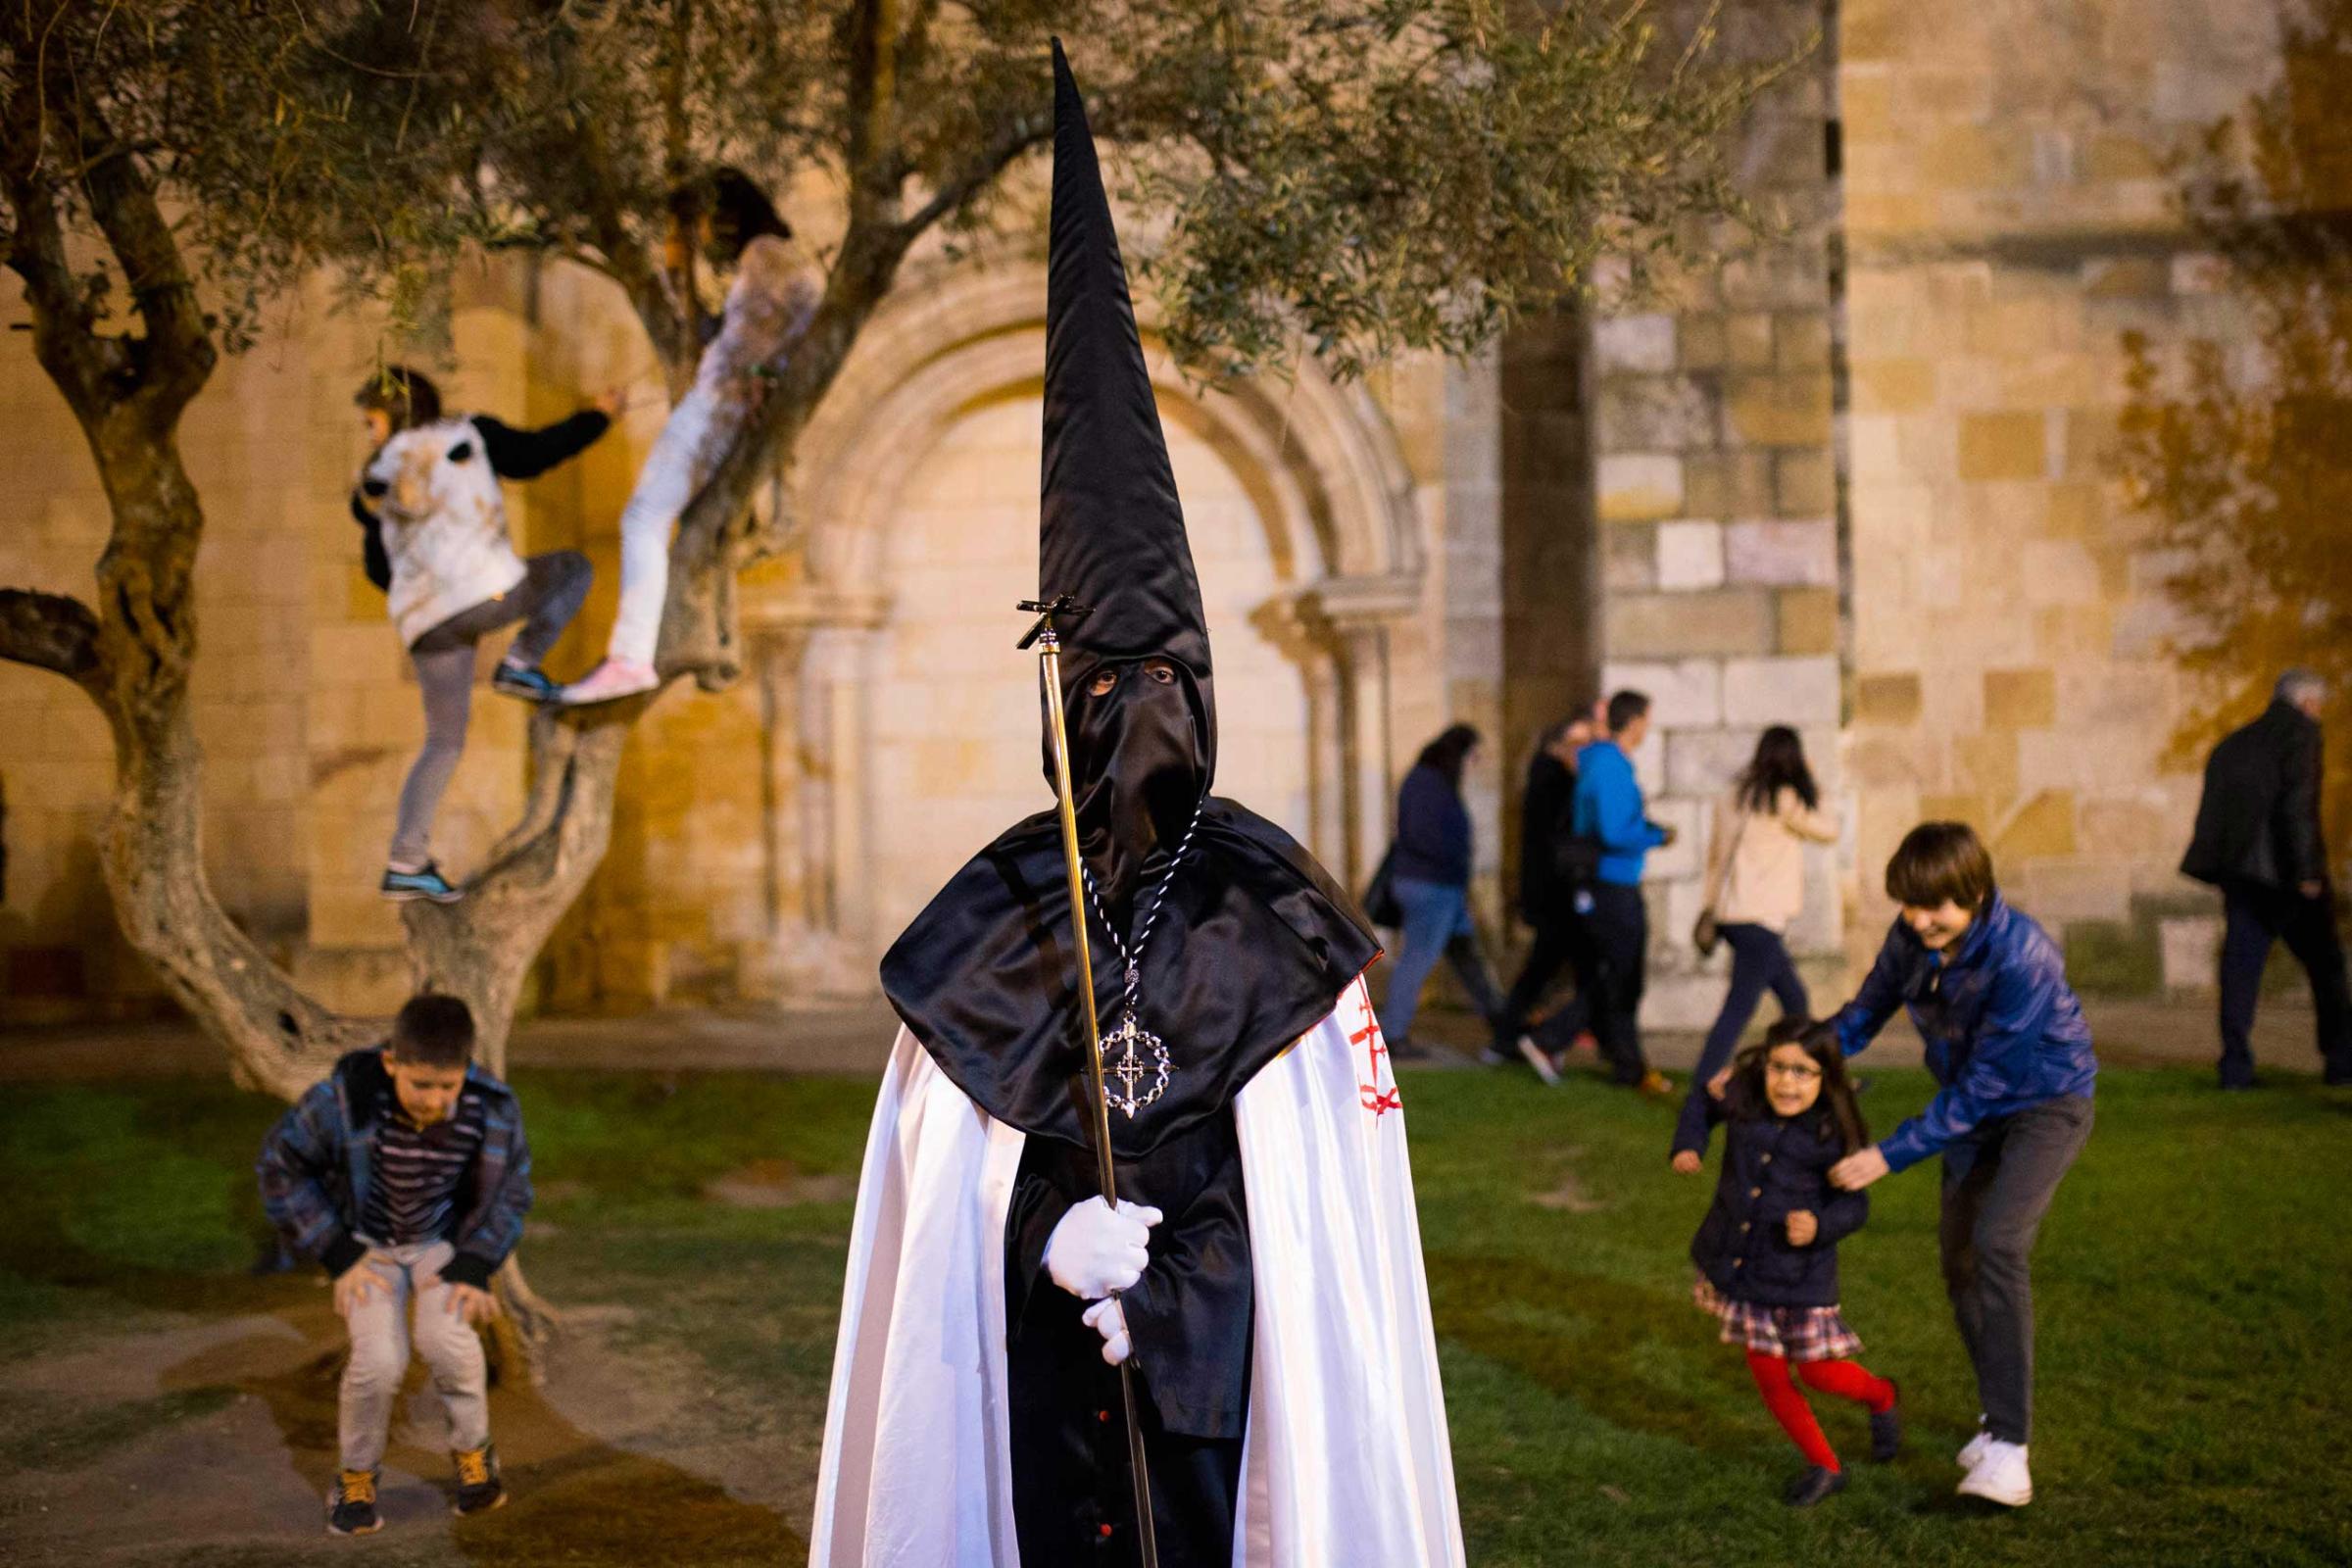 Children play in the background as a penitent watches a march in Zamora, Spain, April 14, 2014.